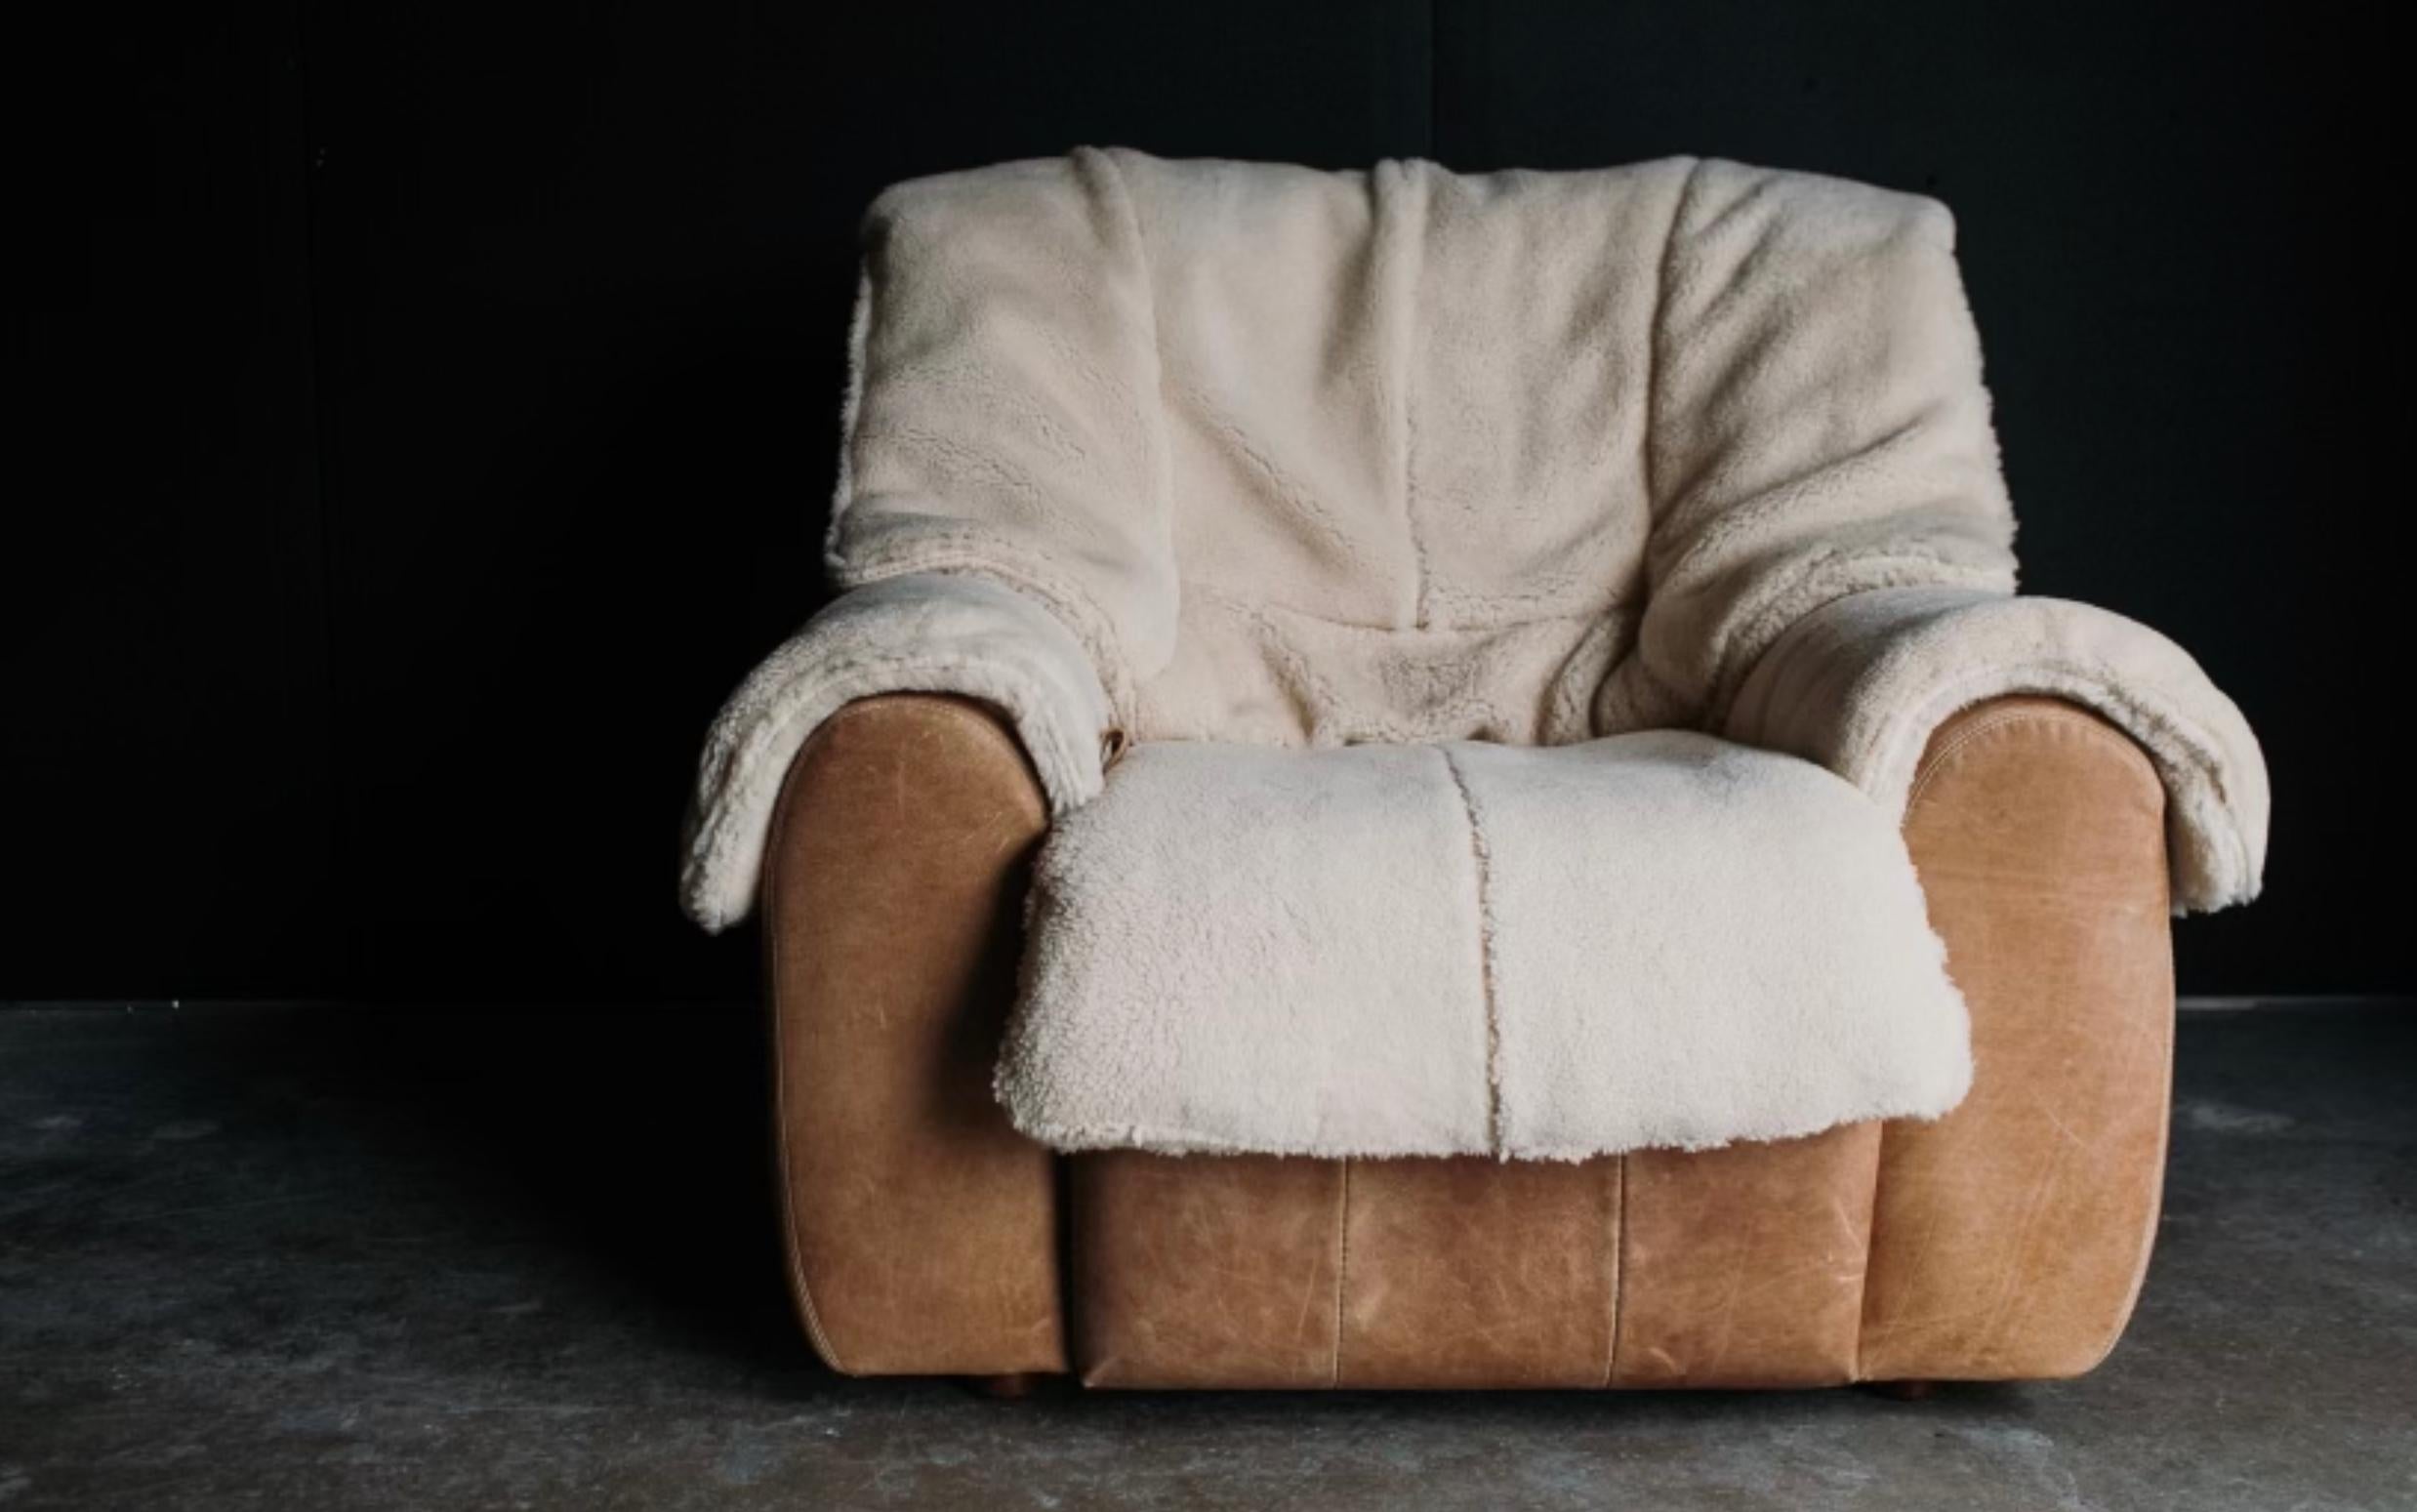 Absolutely the perfect chairs for fireplace sitting, mountain home, Lake House or chalet! Anywhere you need pure cosy comfort, they will fit the bill hands down!
Beautifully reupholstered in natural tone leather and super soft European shearling.